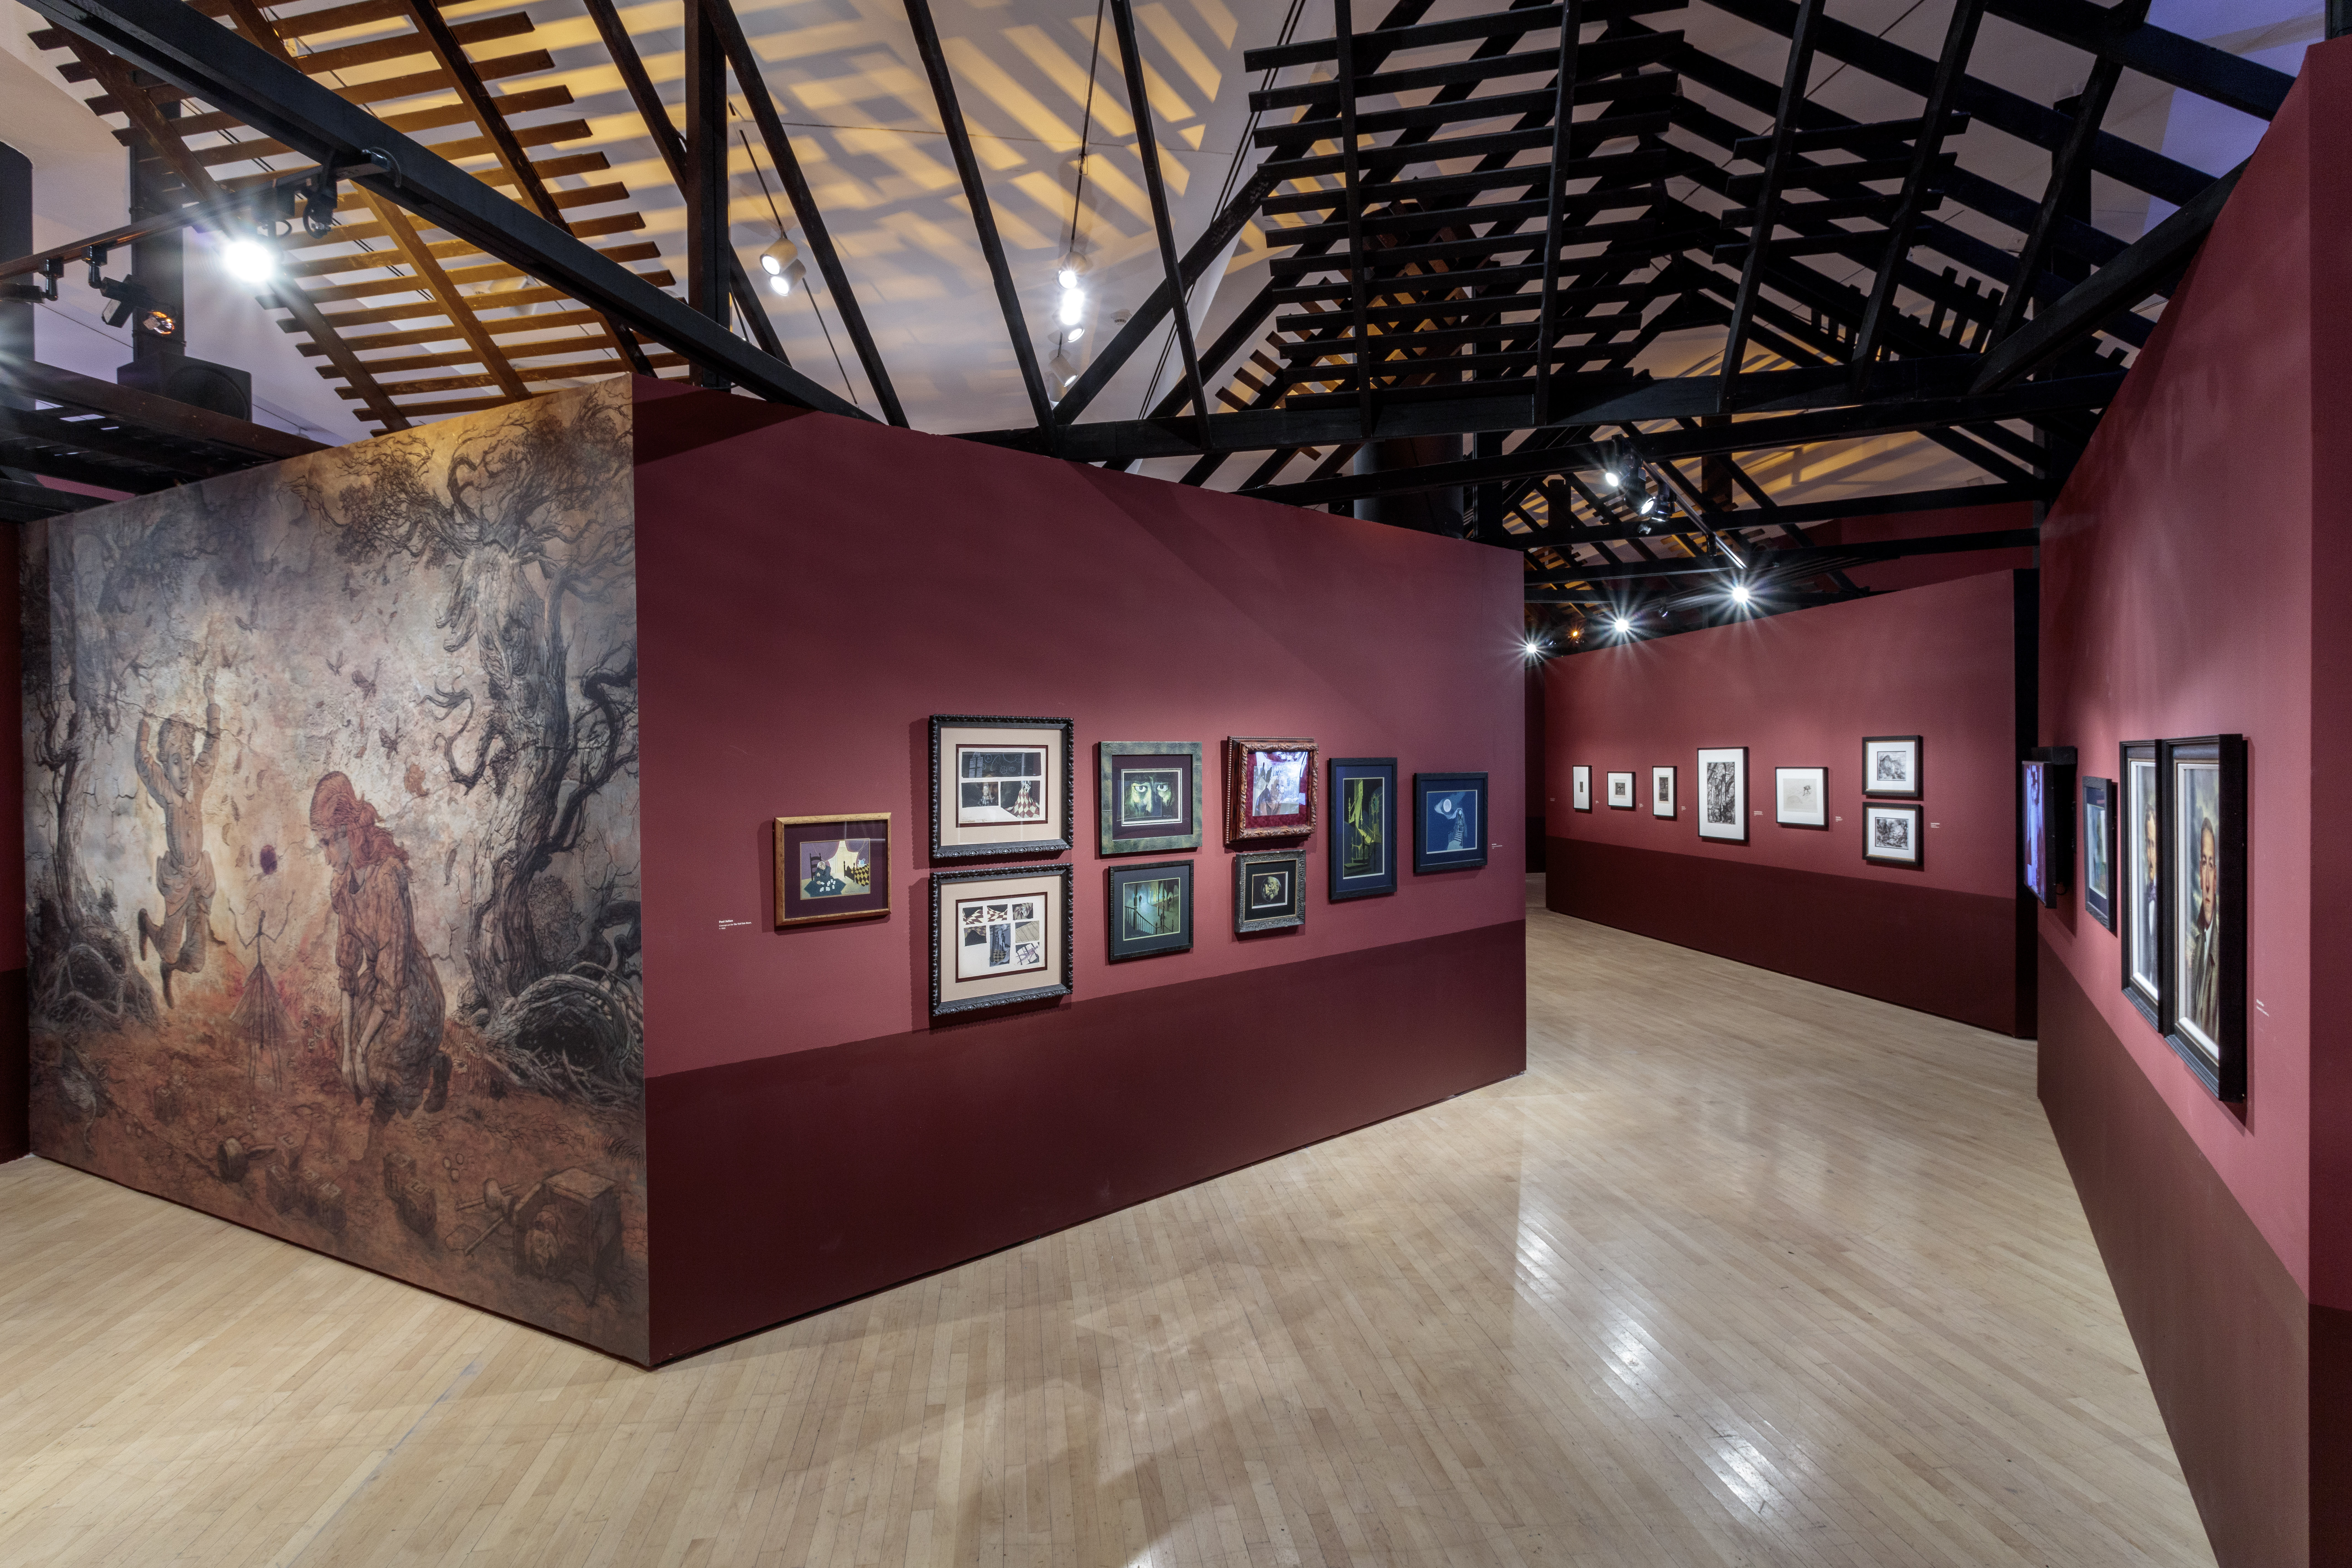 Installation photograph, Guillermo del Toro: At Home with Monsters, Los Angeles County Museum of Art, August 1–November 27, 2016, photo © Joshua White / JWPictures.com